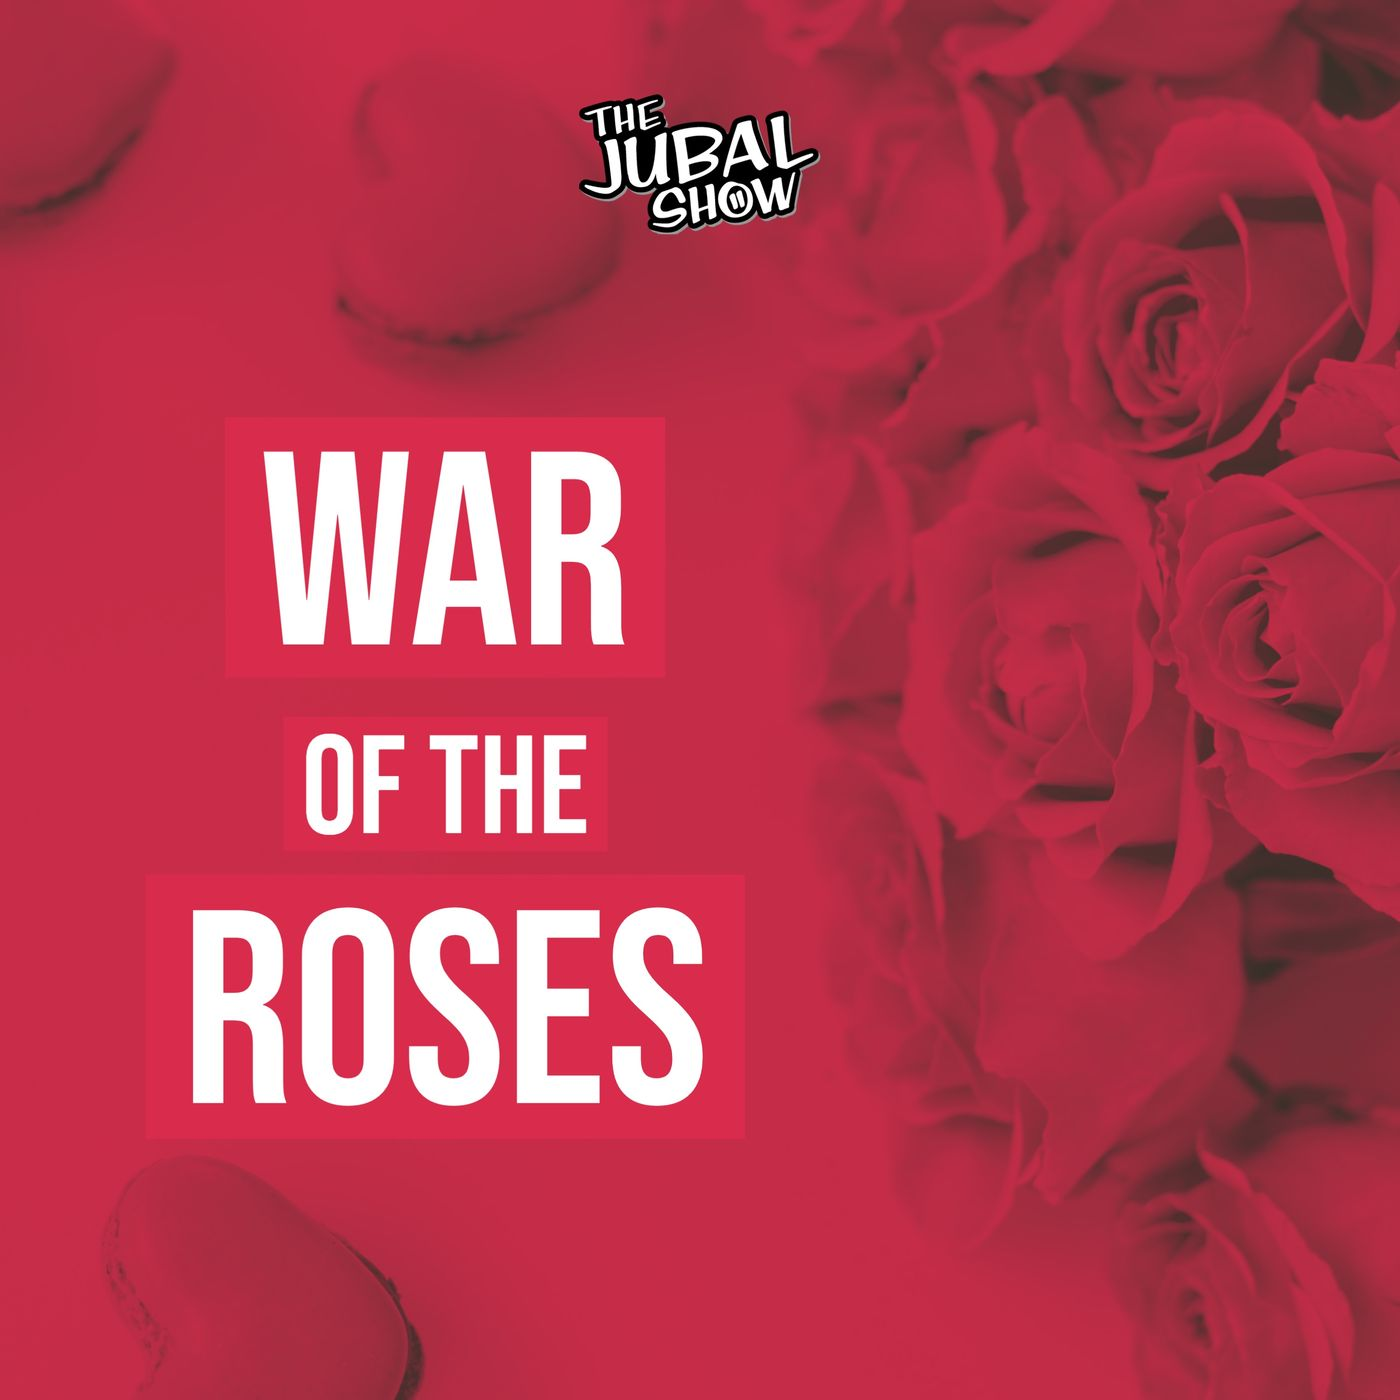 Did you forget something in this War of the Roses!?